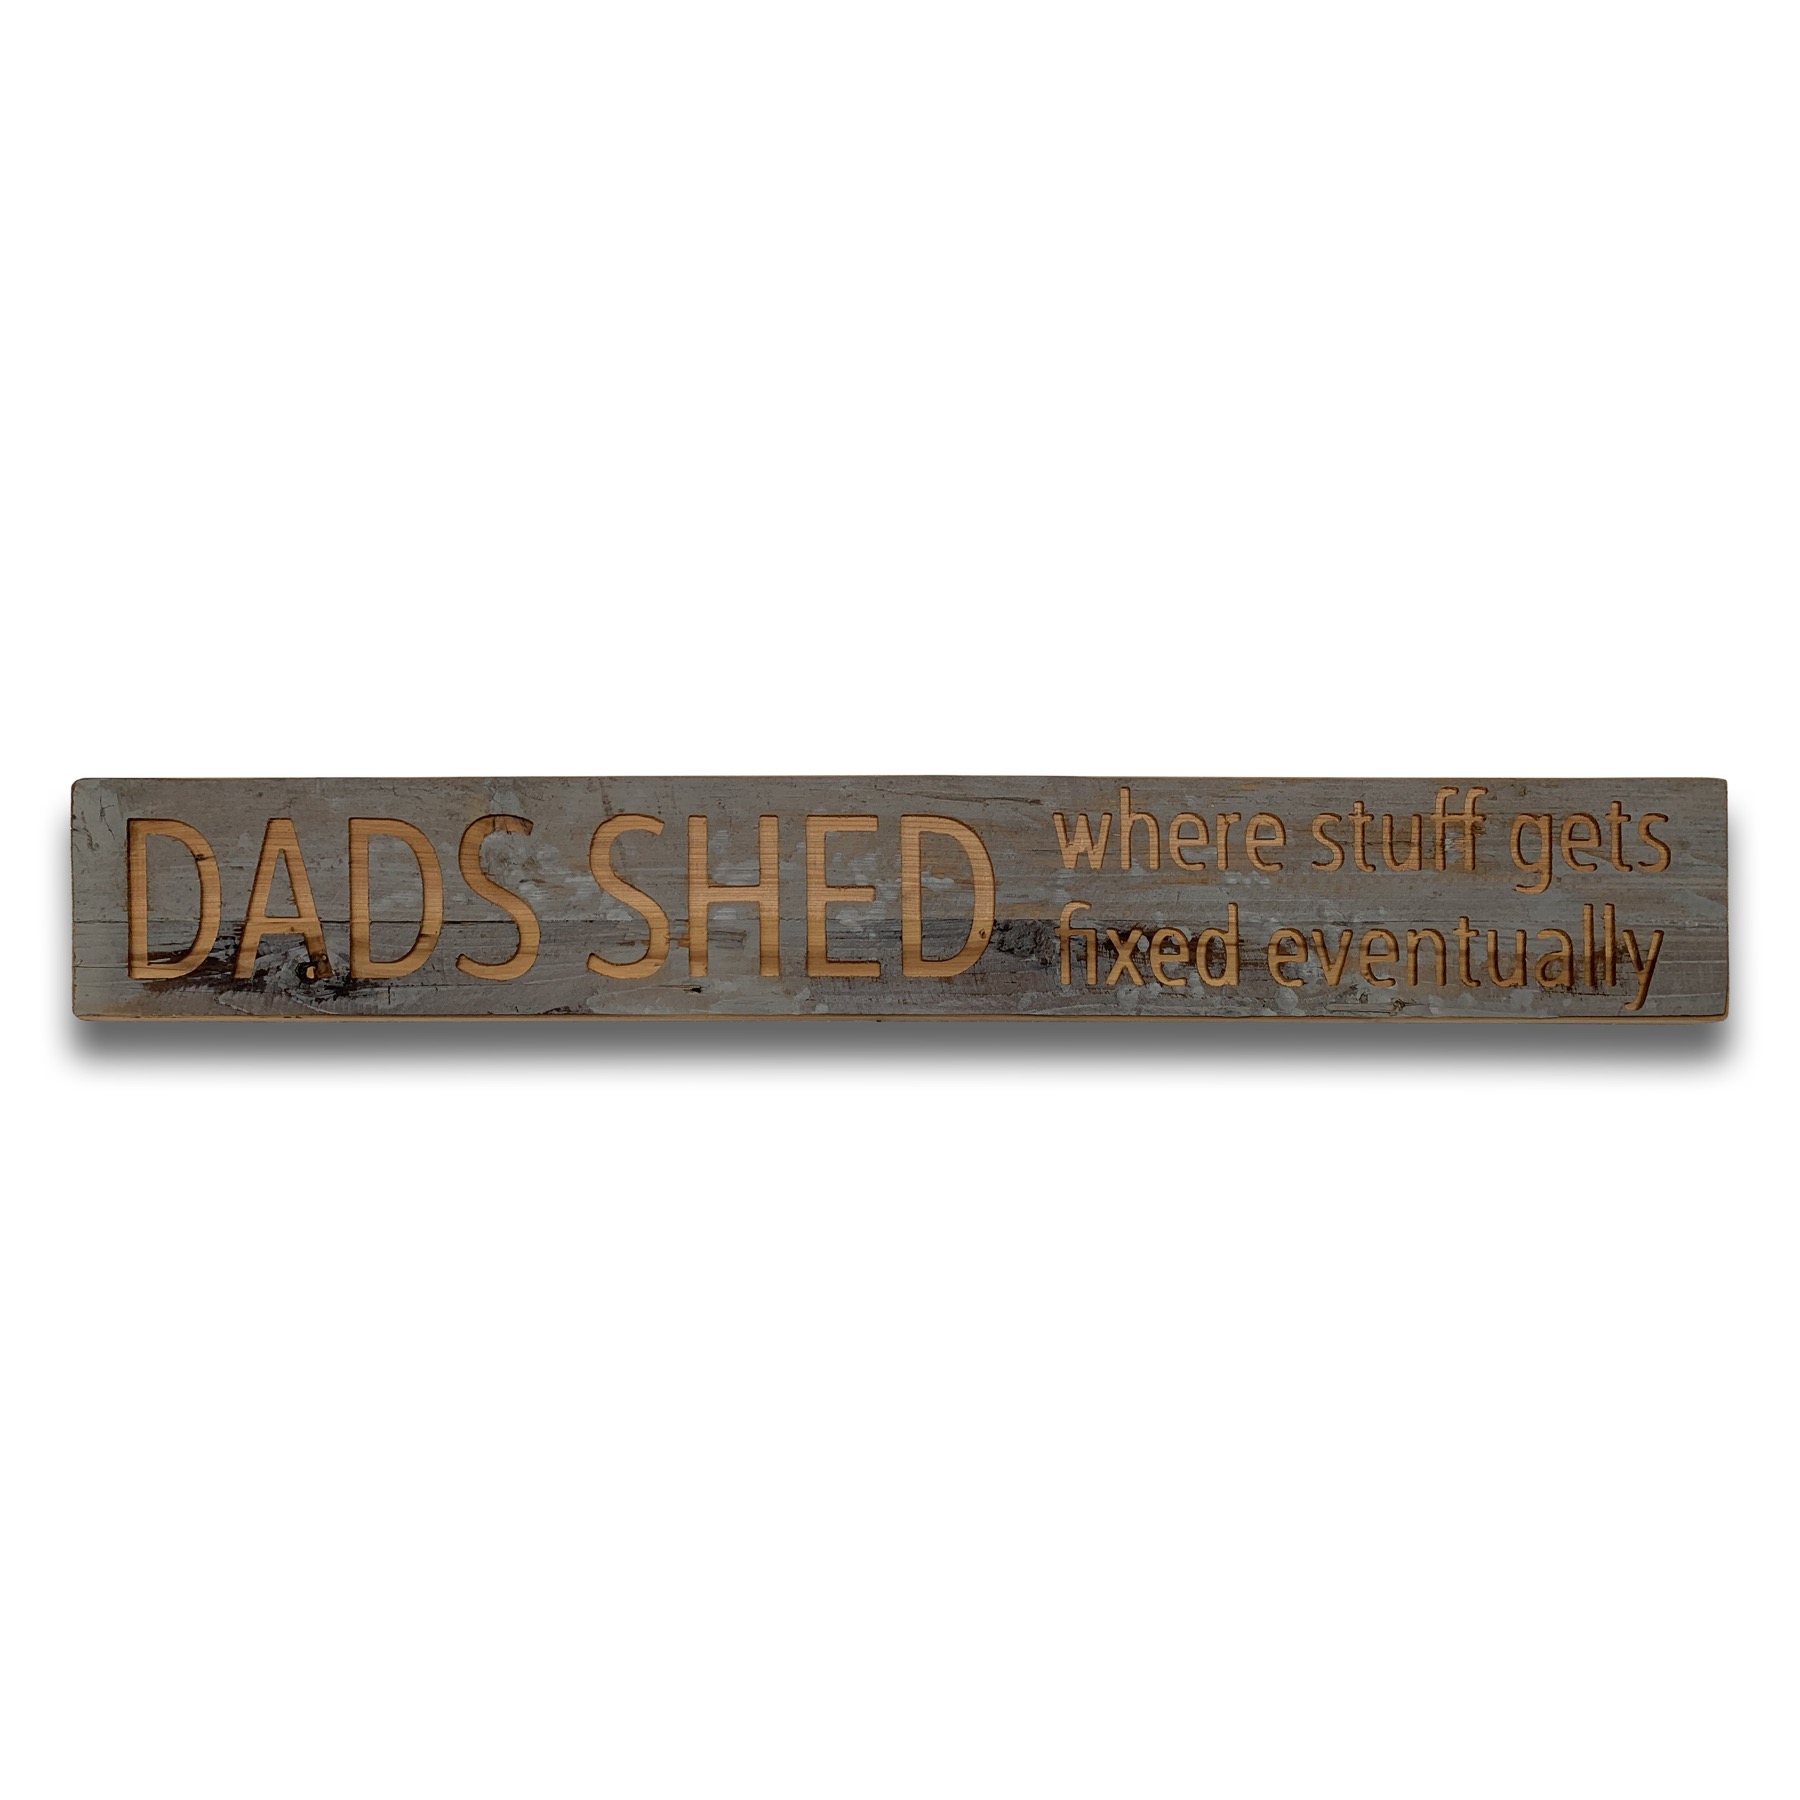 Dads Shed Grey Wash Wooden Message Plaque - Image 1